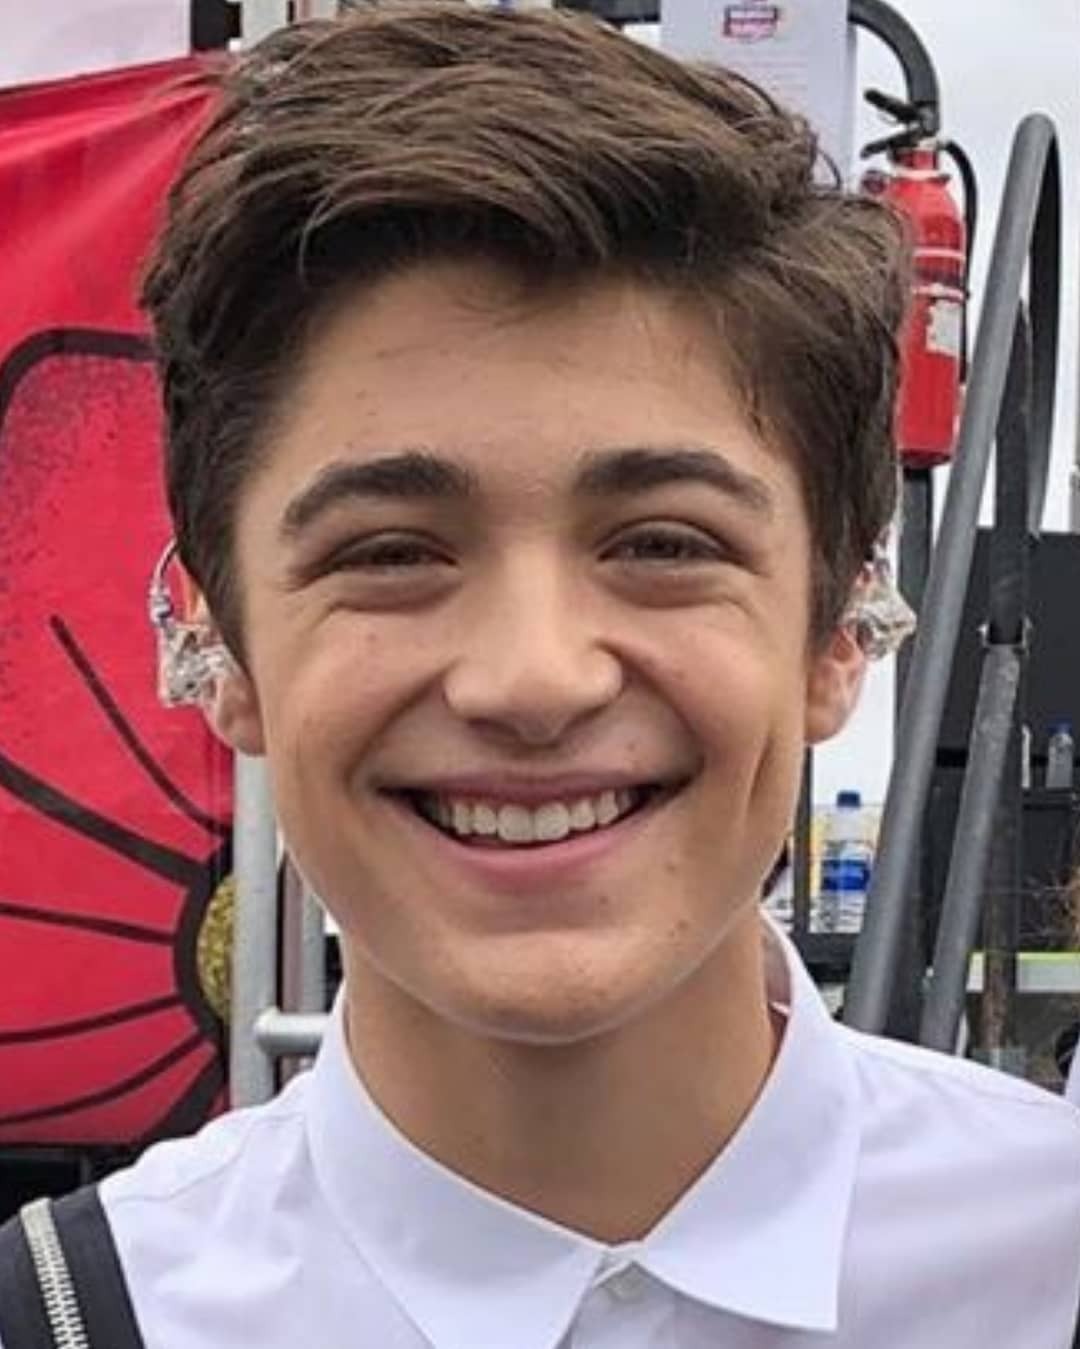 Picture Of Asher Angel In General Pictures Asher Angel 1562953097 Teen Idols 4 You 